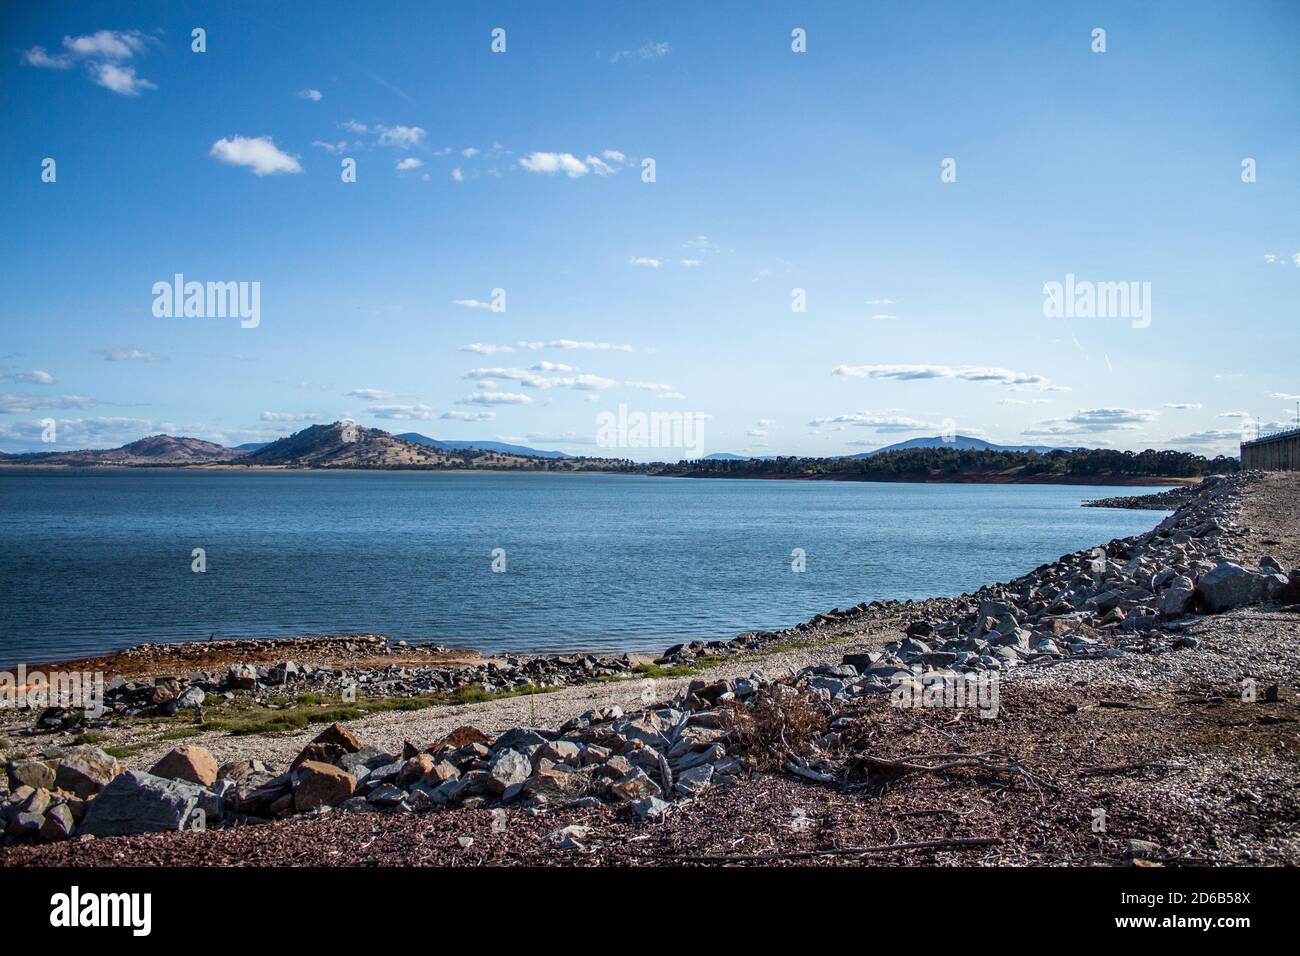 Blue water filled lake dam with rocky foreshore and small hills in background against blue sky Stock Photo